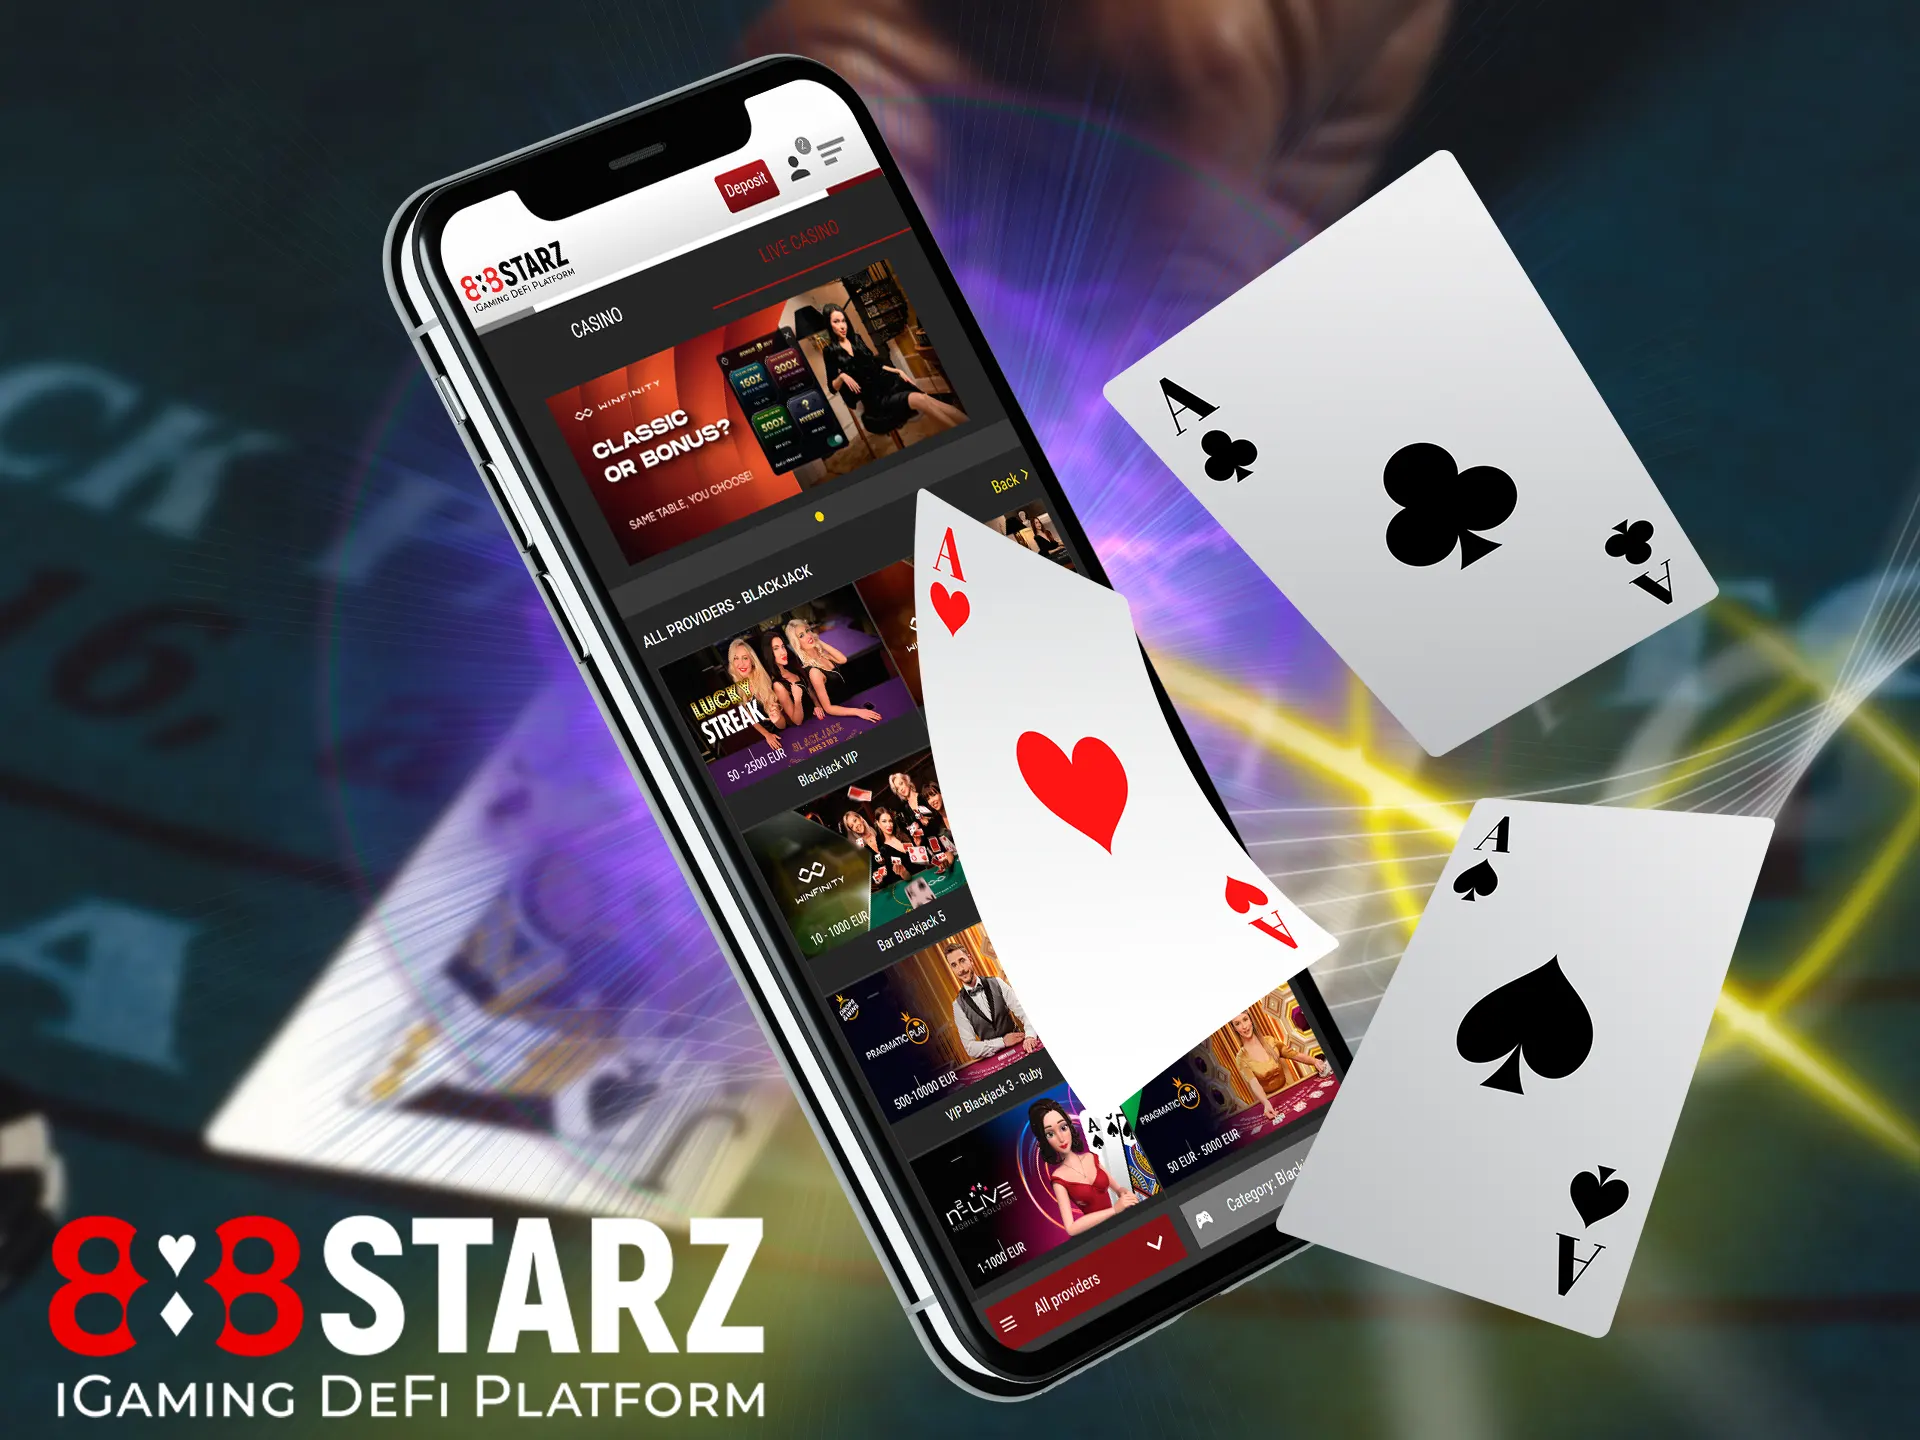 A giant jackpot awaits 888starz players, as well as many other interesting prizes.